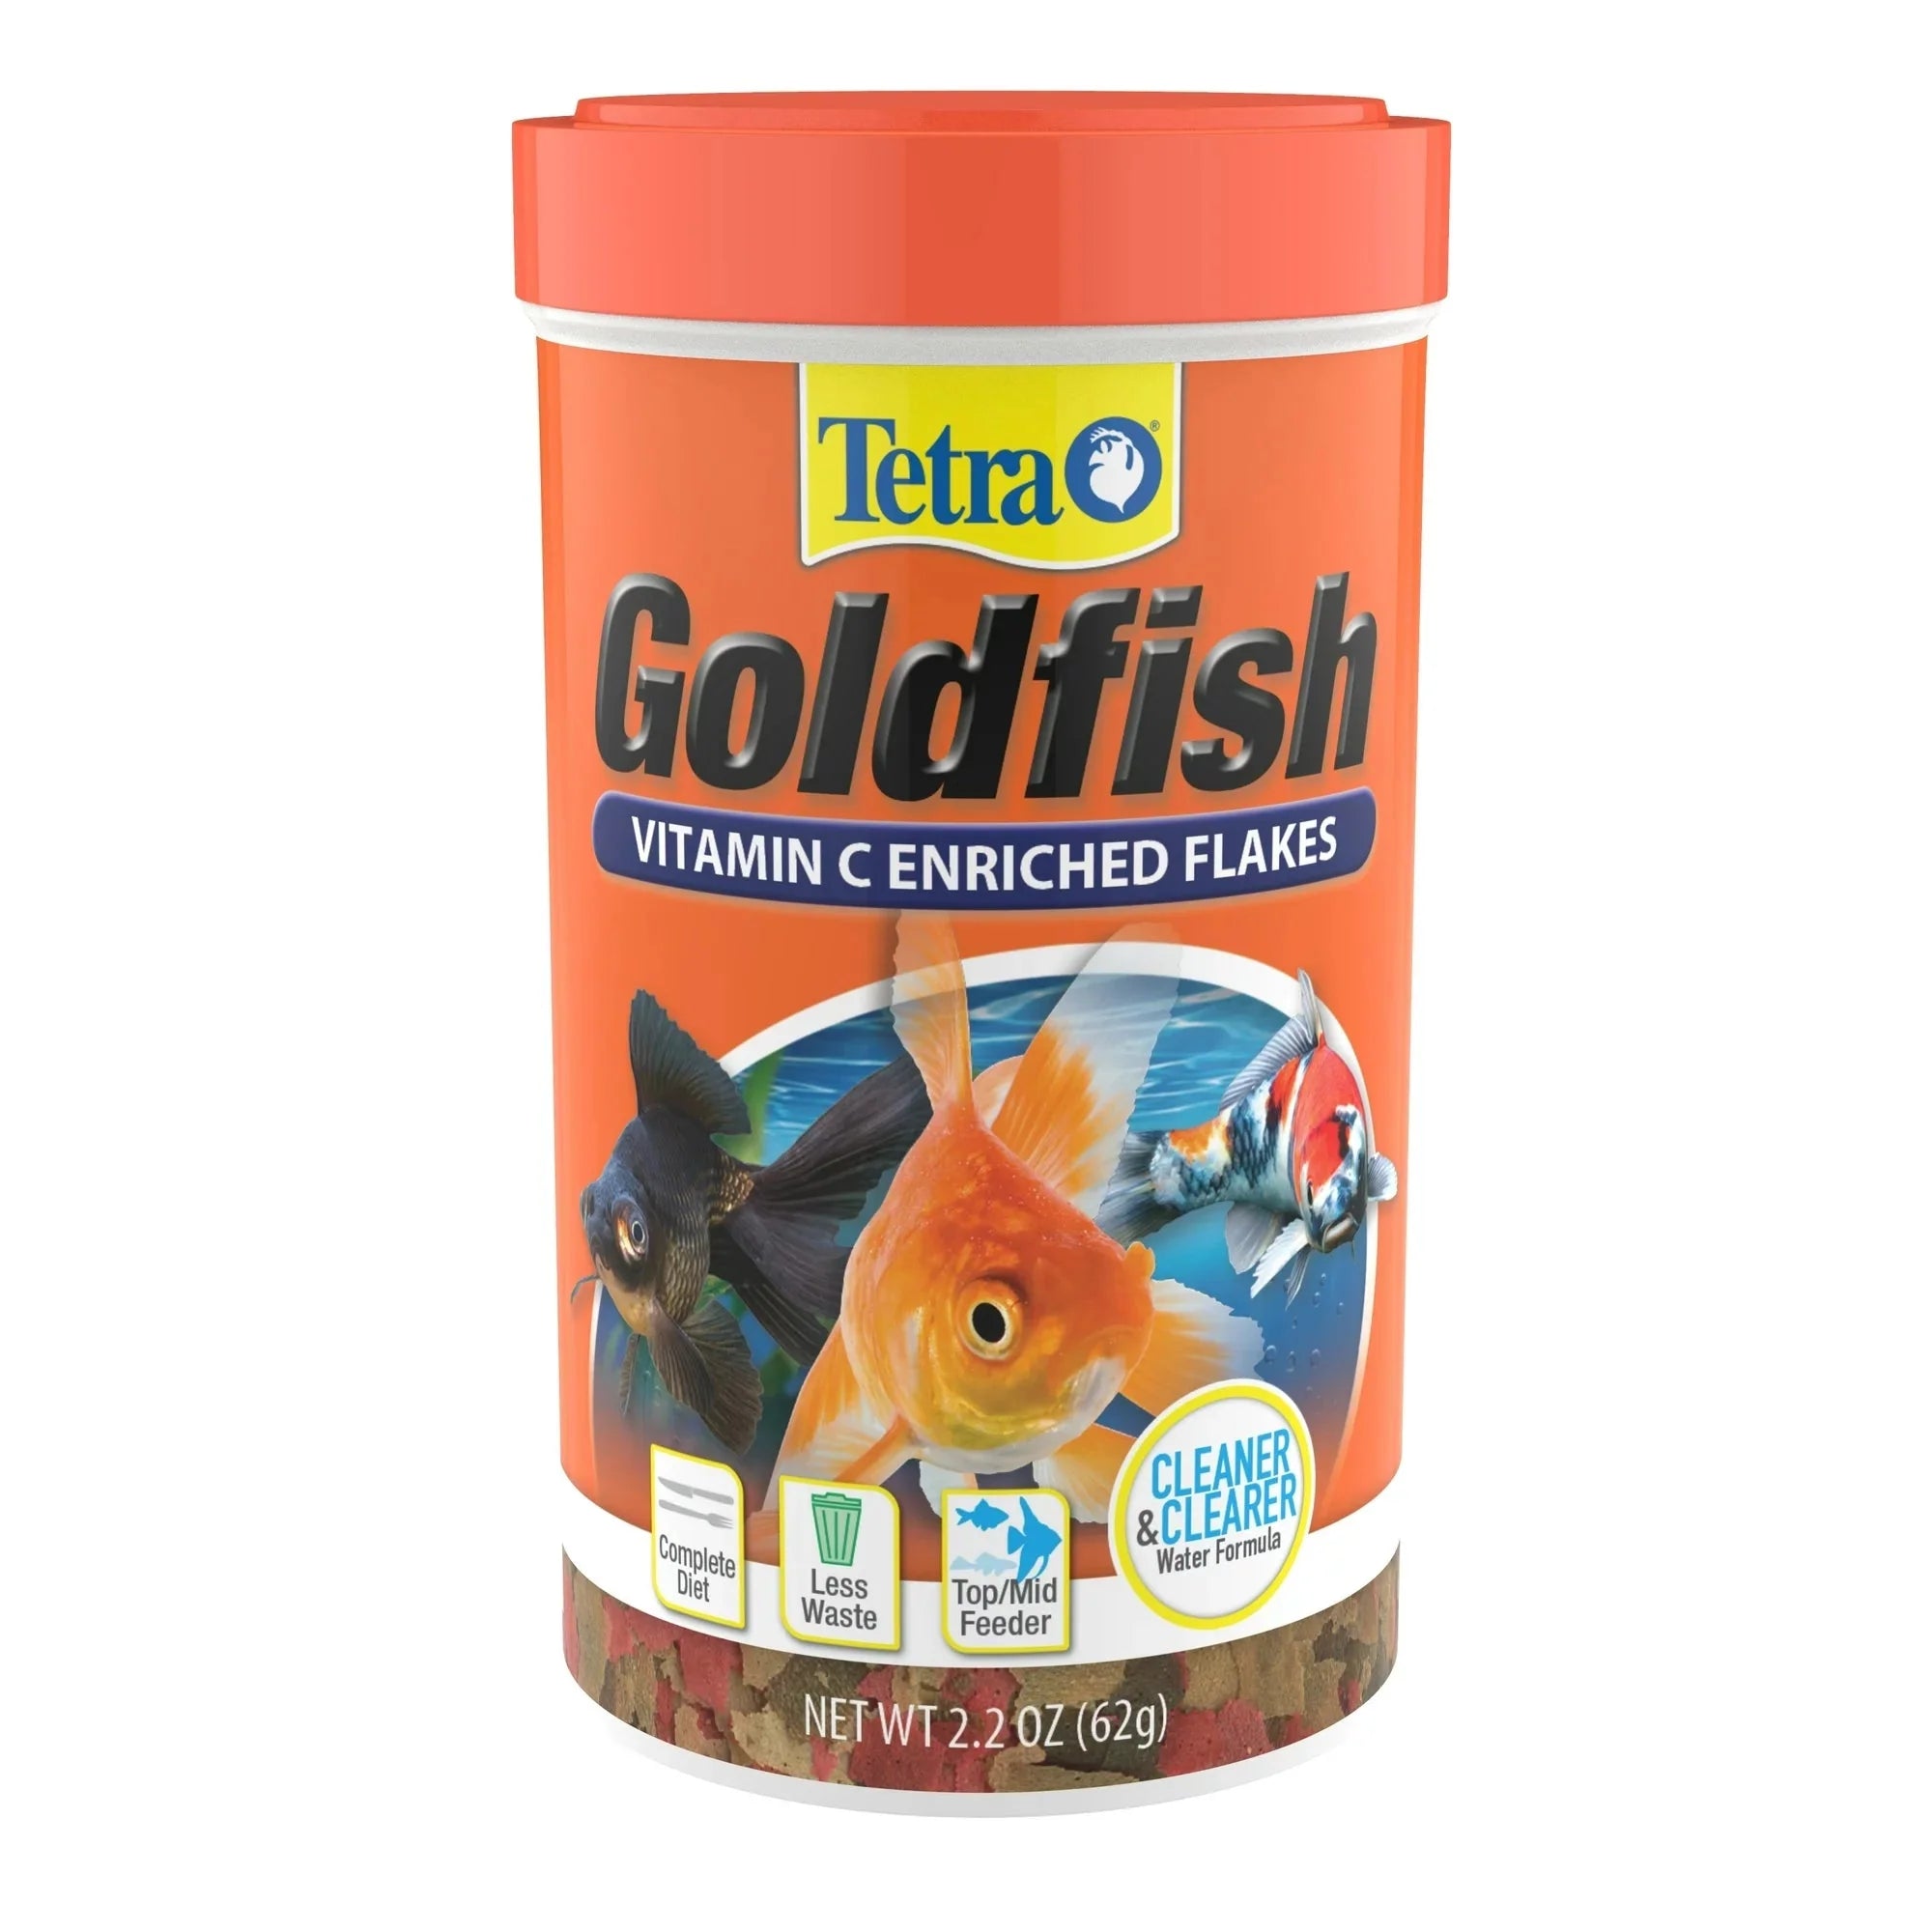 Wholesale prices with free shipping all over United States Tetra Goldfish Vitamin C Enriched Flakes Fish Food, 2.2 oz - Steven Deals